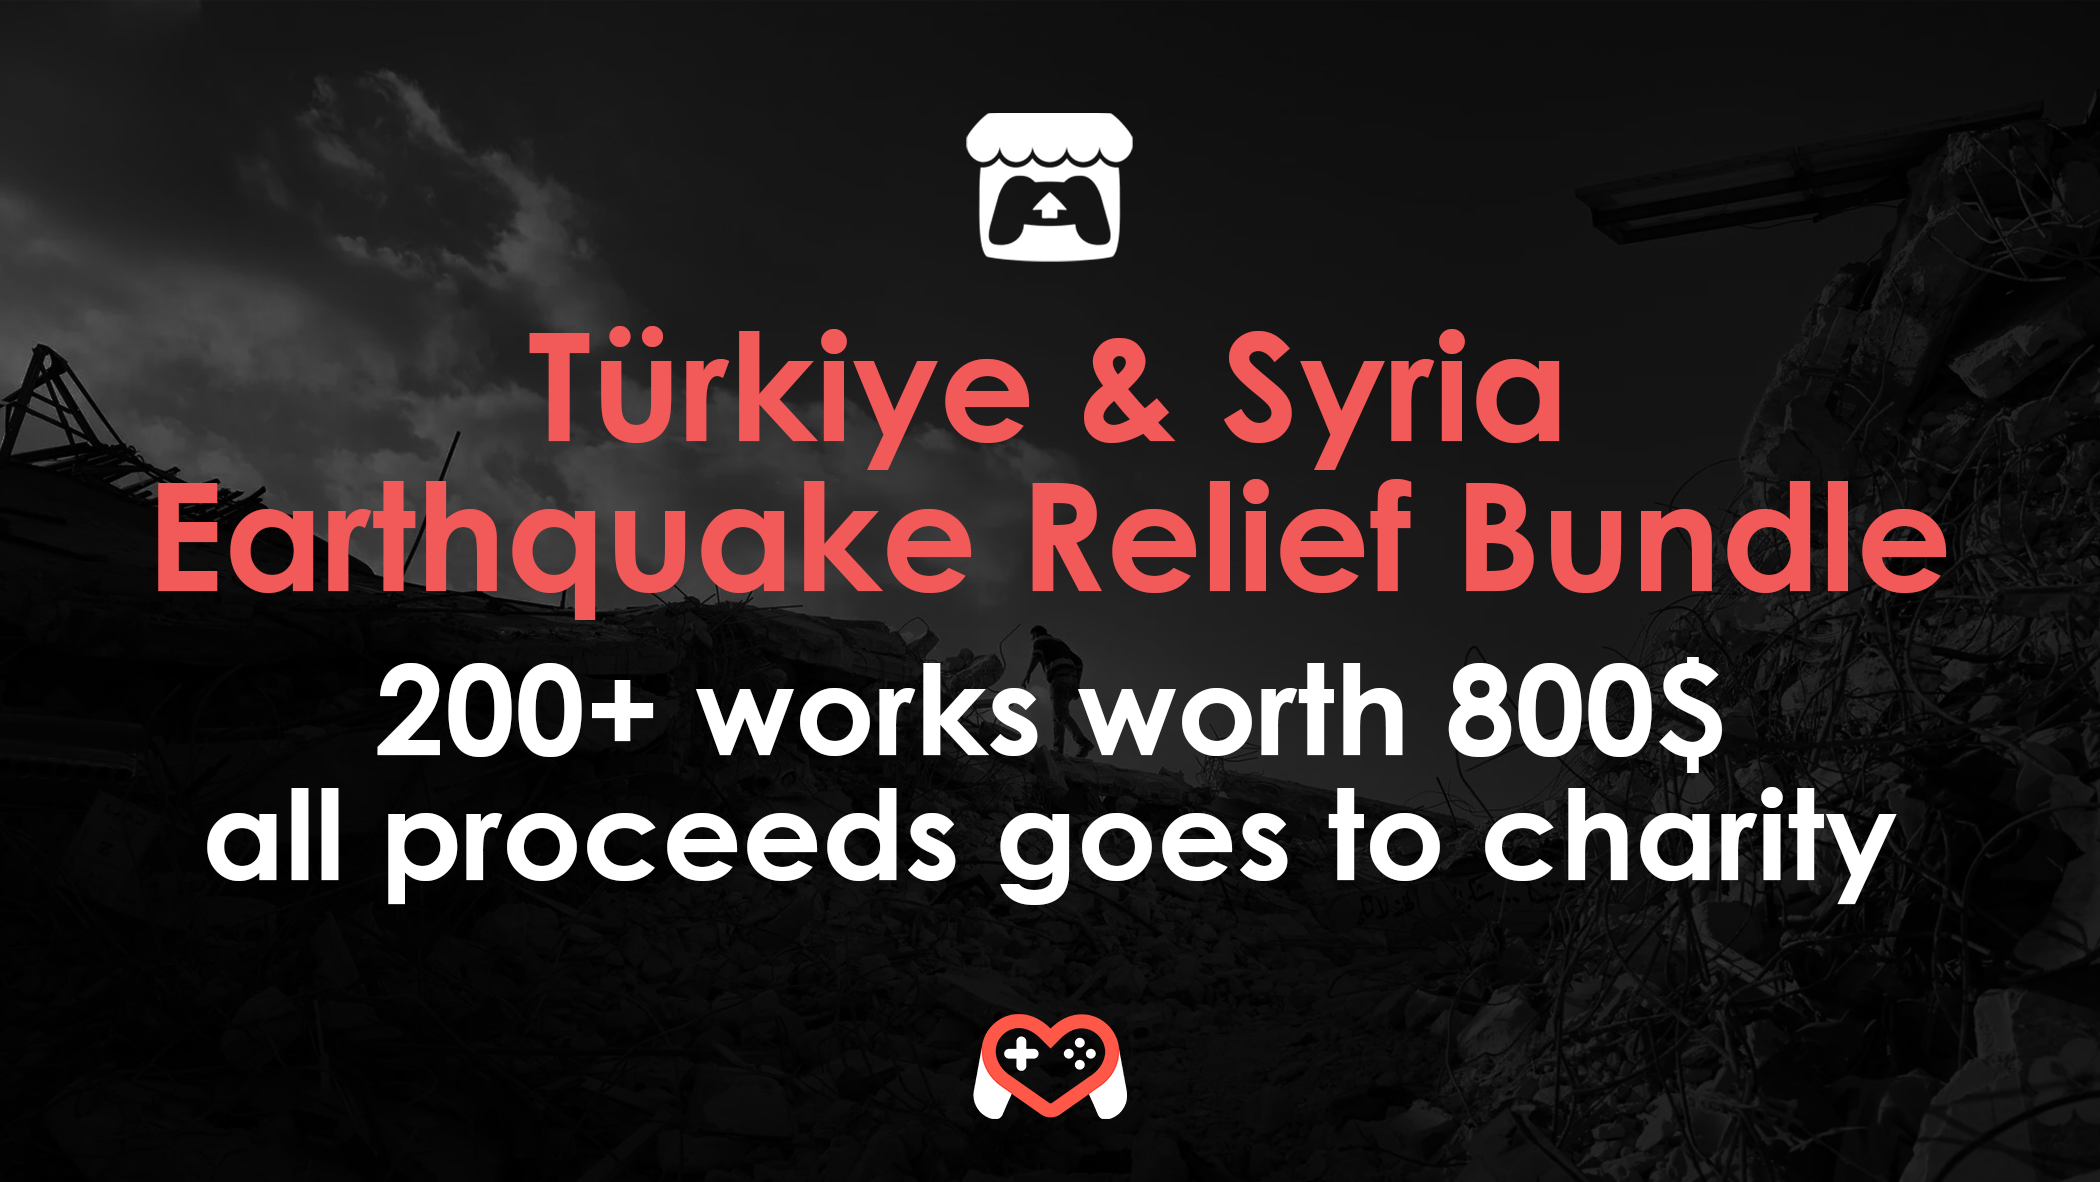 This $30 bundle for Turkey and Syria earthquake relief is a great